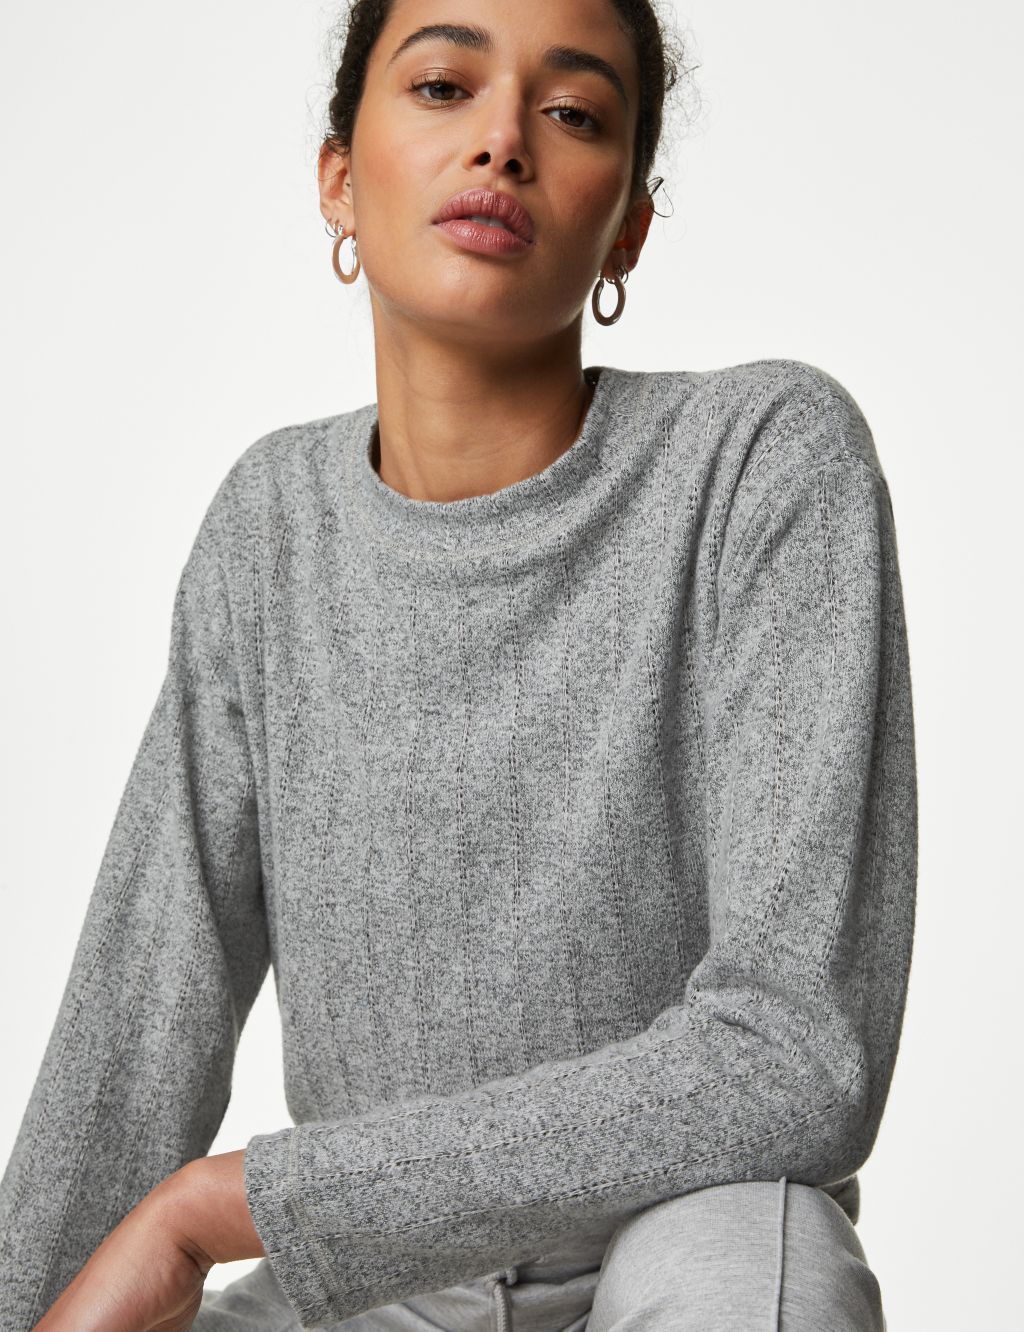 Page 2 - Women’s Long-Sleeved Tops | M&S